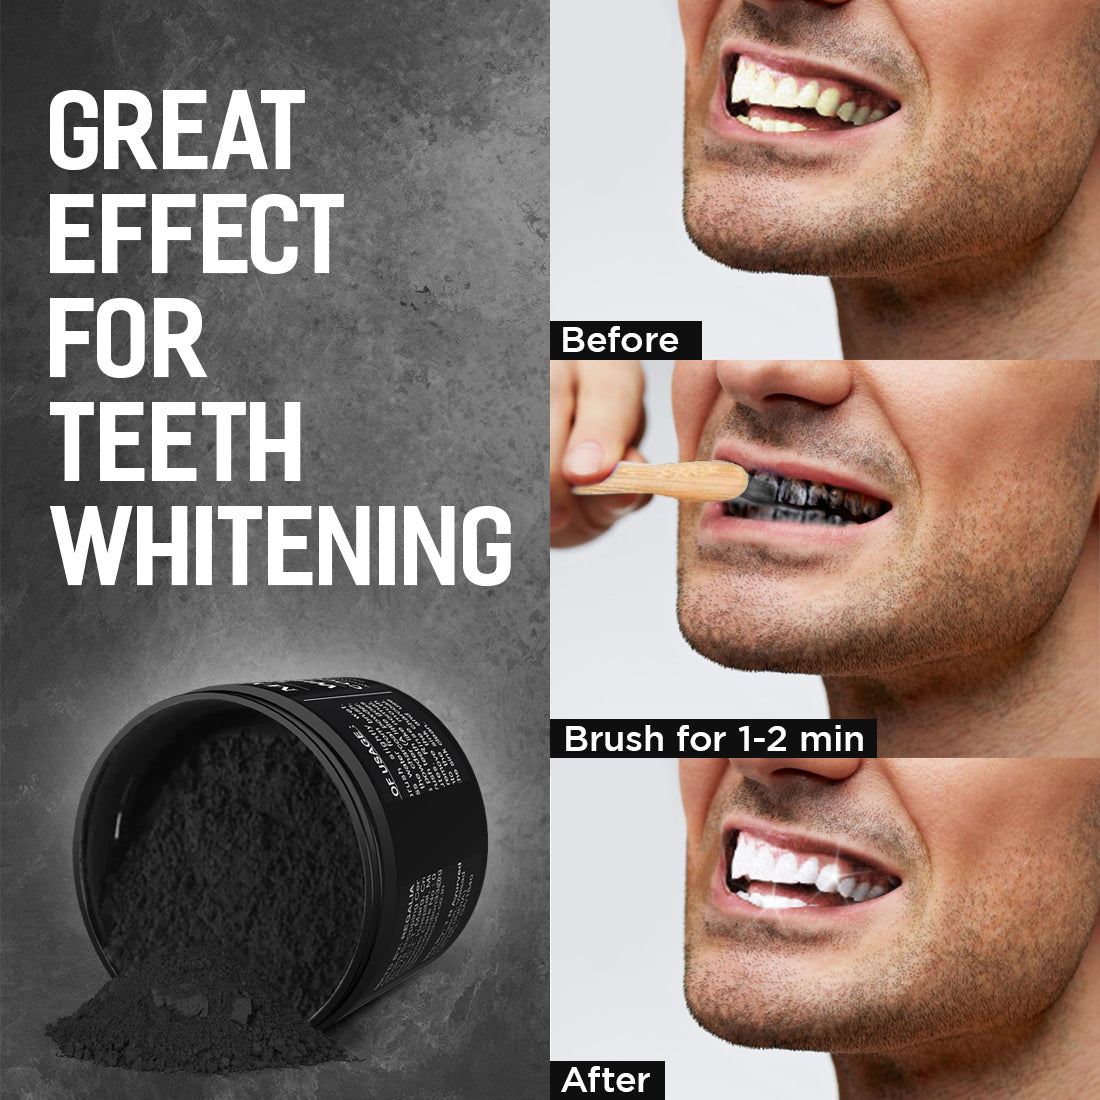 Mancode Coconut Shell Activated Charcoal Powder for Teeth Whitening 25mg